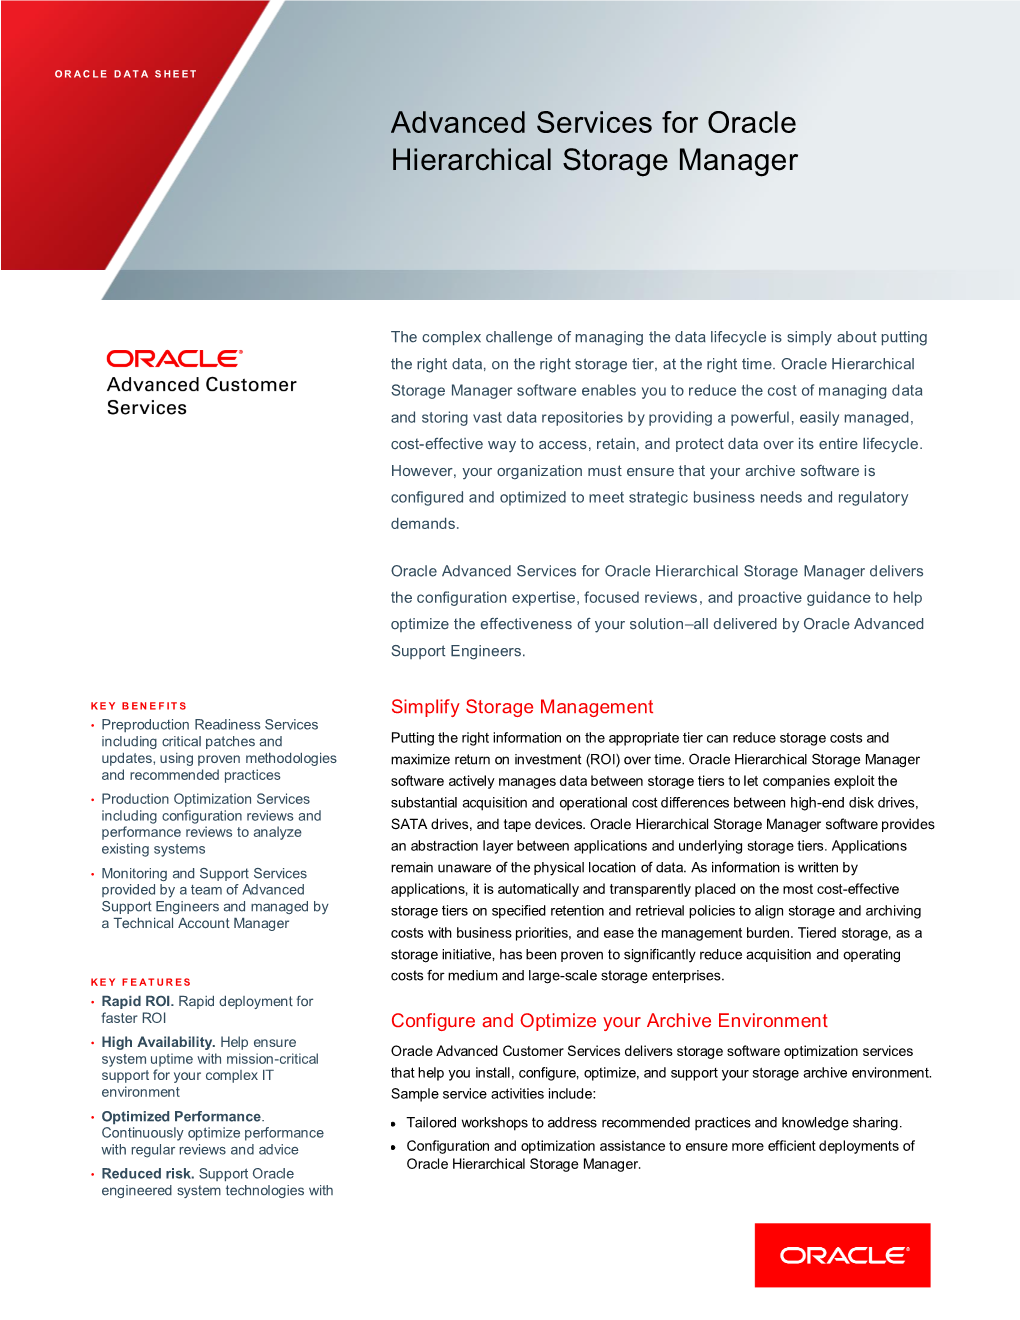 Advanced Services for Oracle Hierarchical Storage Manager